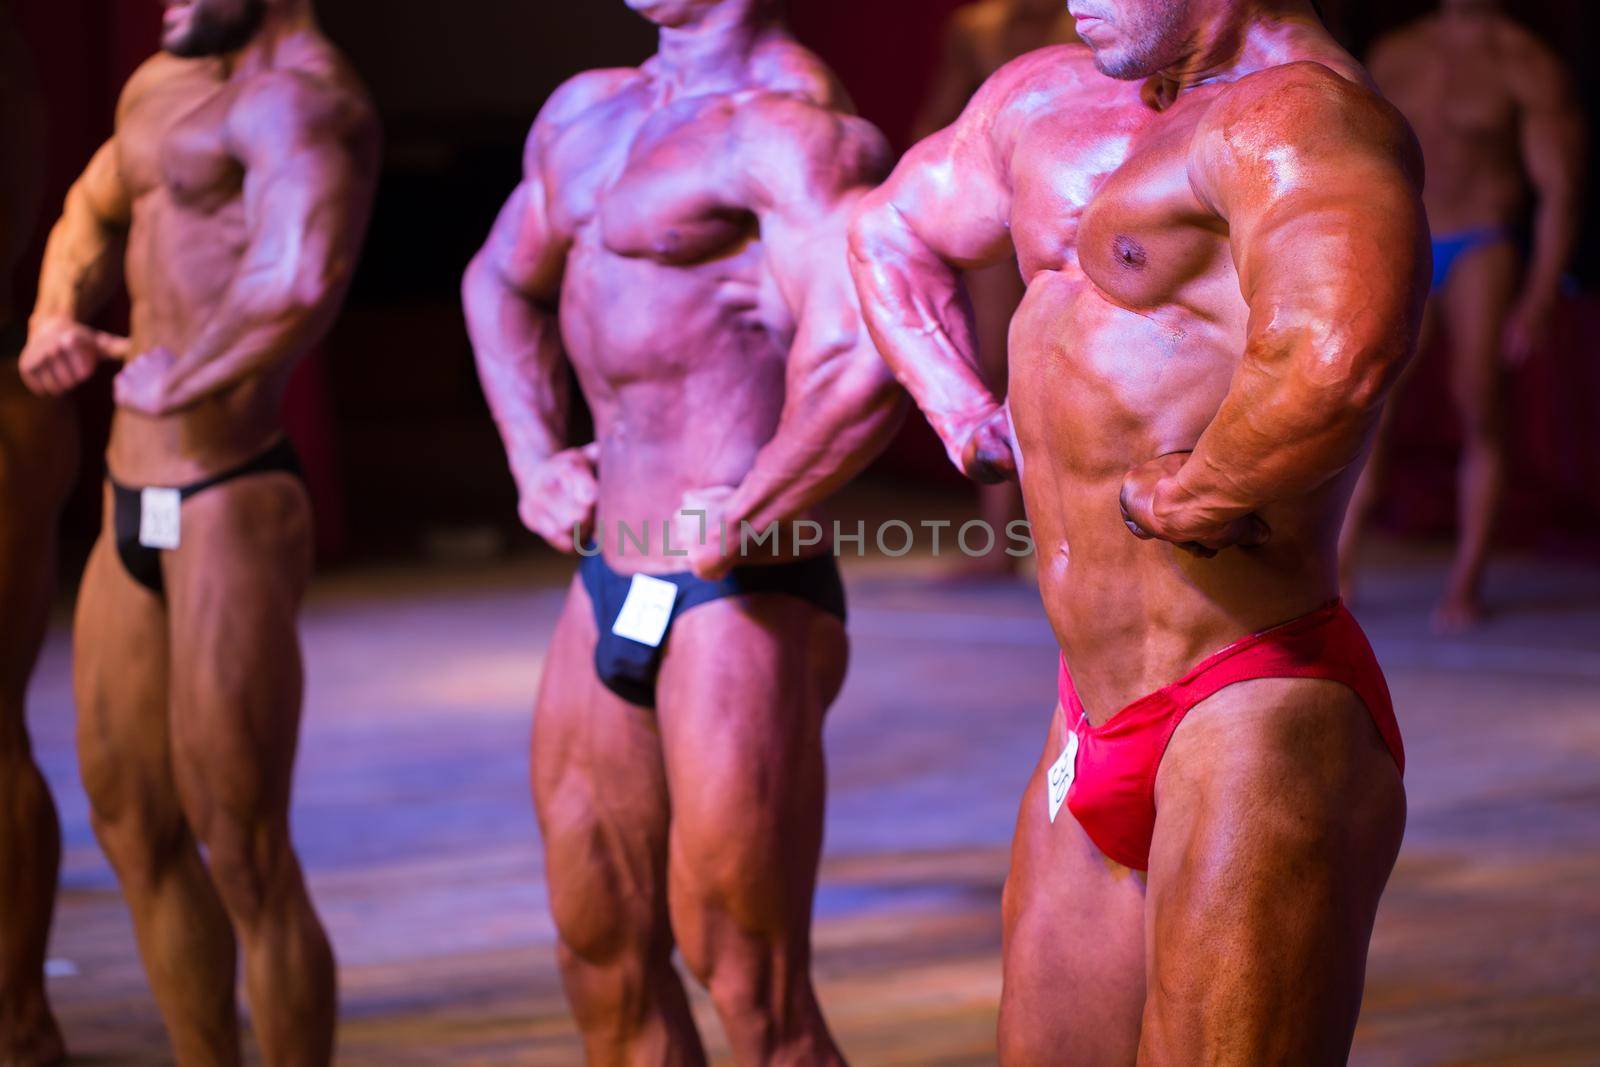 athlete bodybuilder demonstrates abdominal muscles and chest at competitions